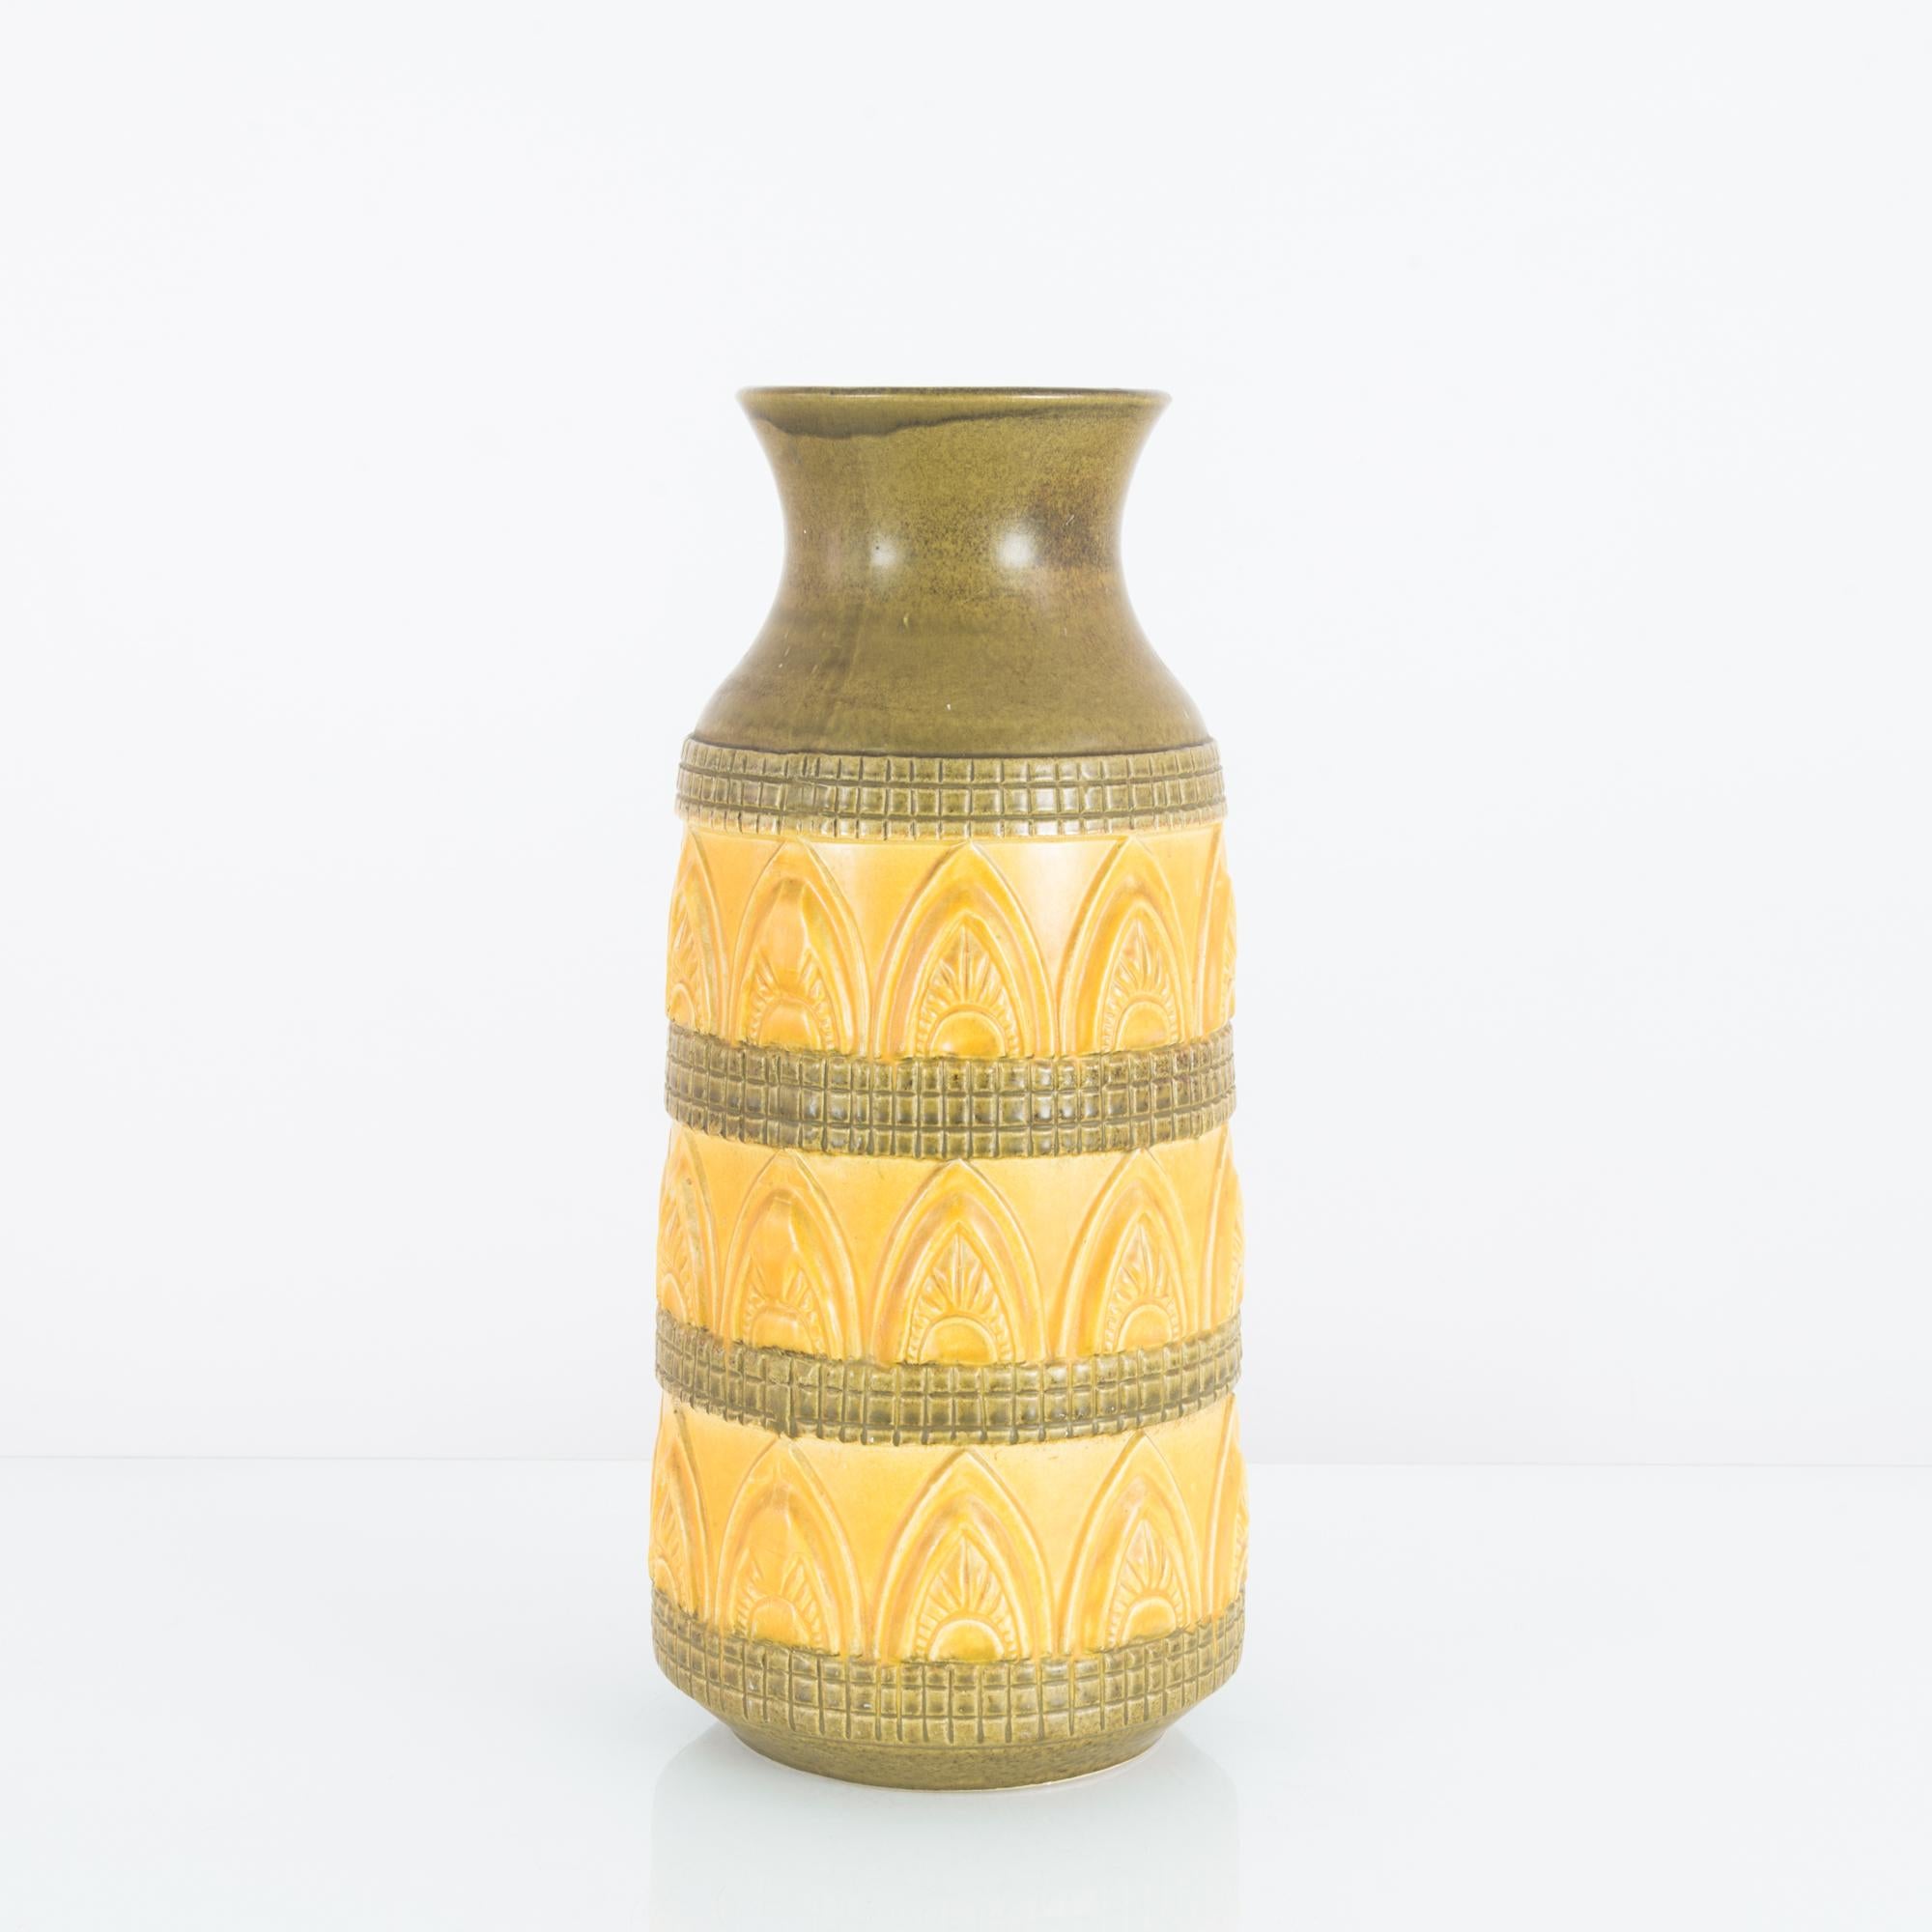 A ceramic vase from Germany, produced circa 1970. A ceramic vase in beautiful earth tone bands of muted cornflower yellow and Xanadu green. Decorated in Art Deco inspired bas relief of sunburst motifs inside pointed double arches resting on a raised